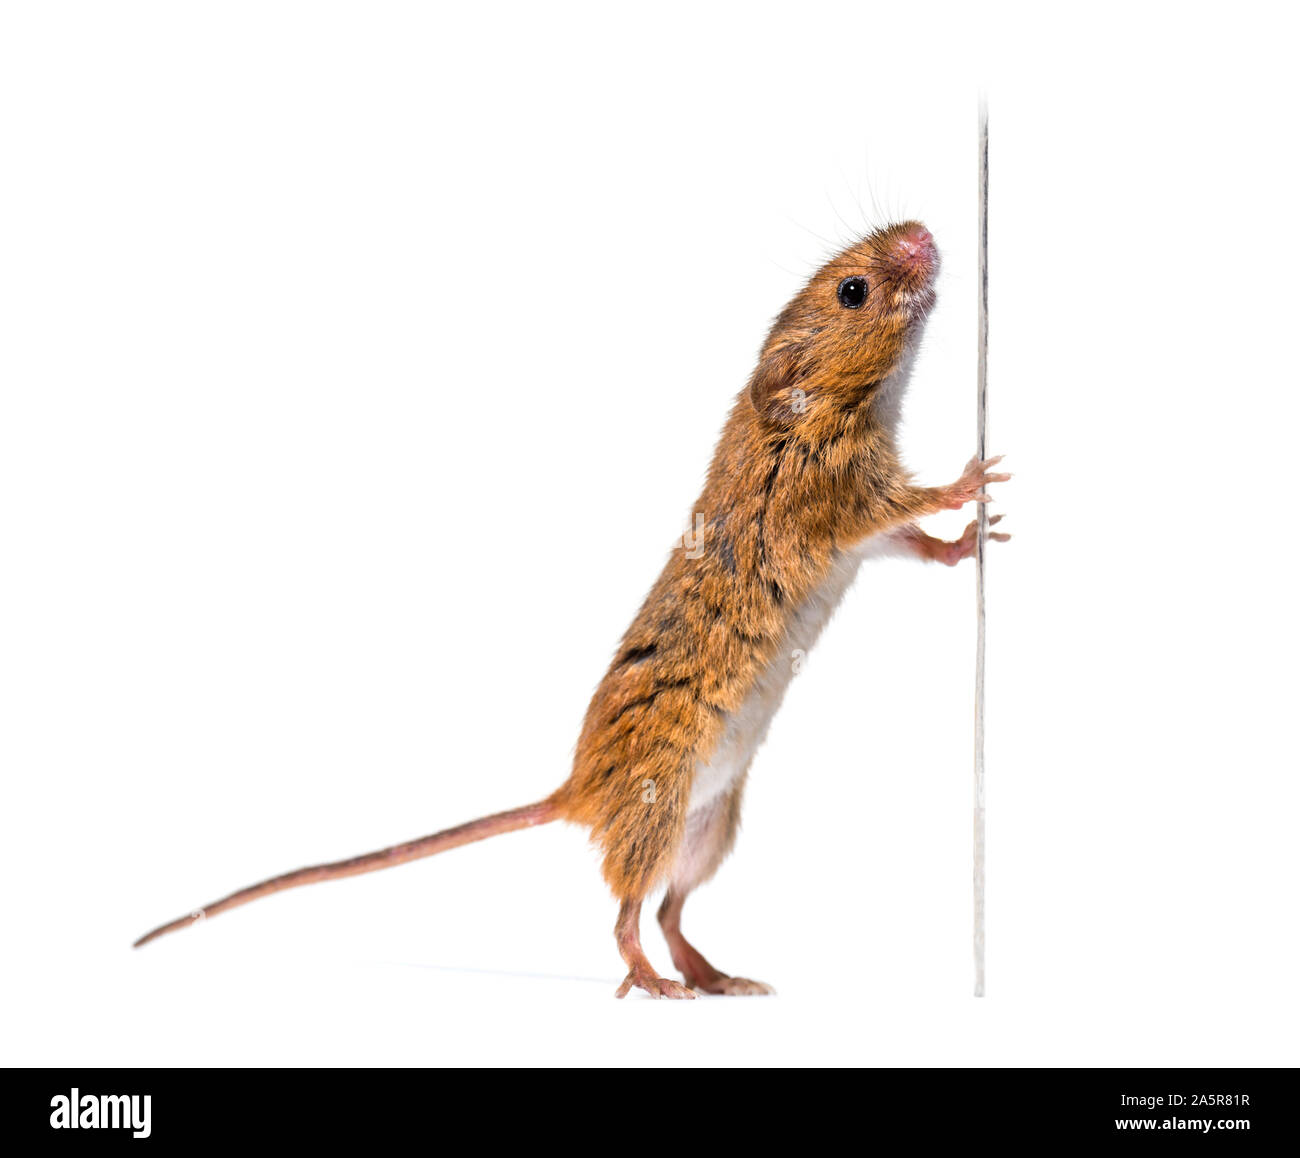 Eurasian harvest mouse, Micromys minutus, looking up in front of white background Stock Photo